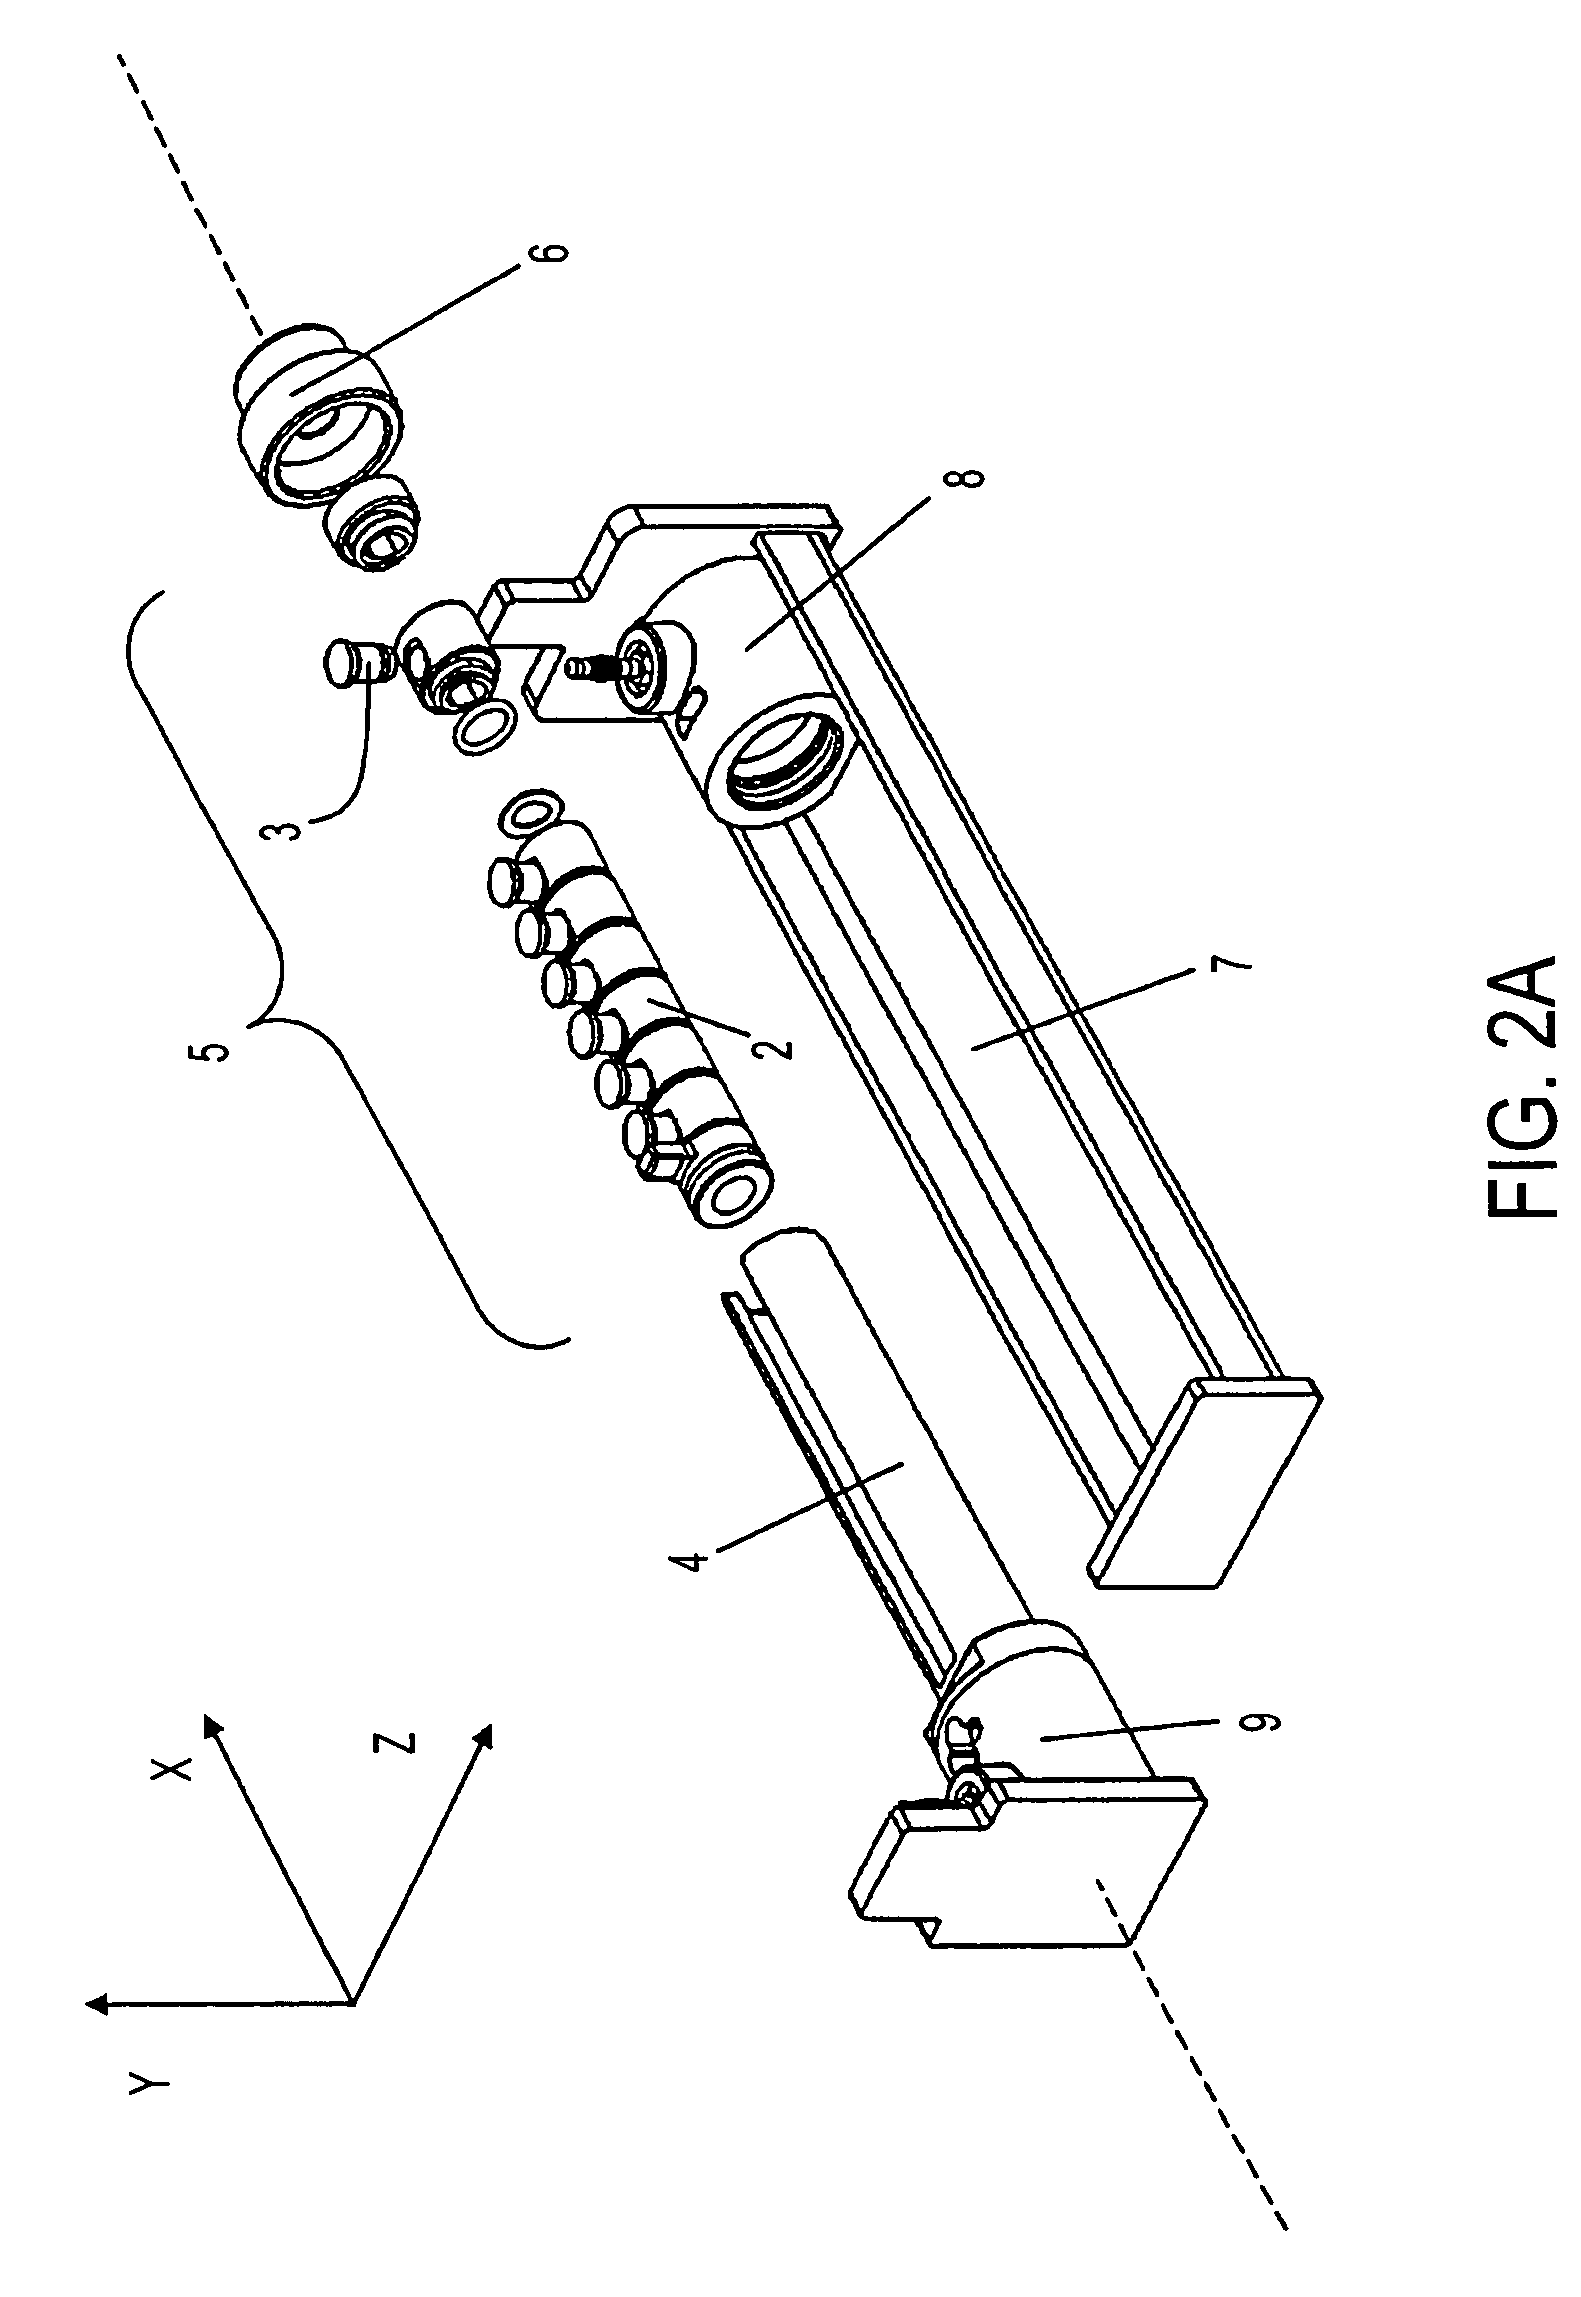 Solution phase electrophoresis device, components, and methods